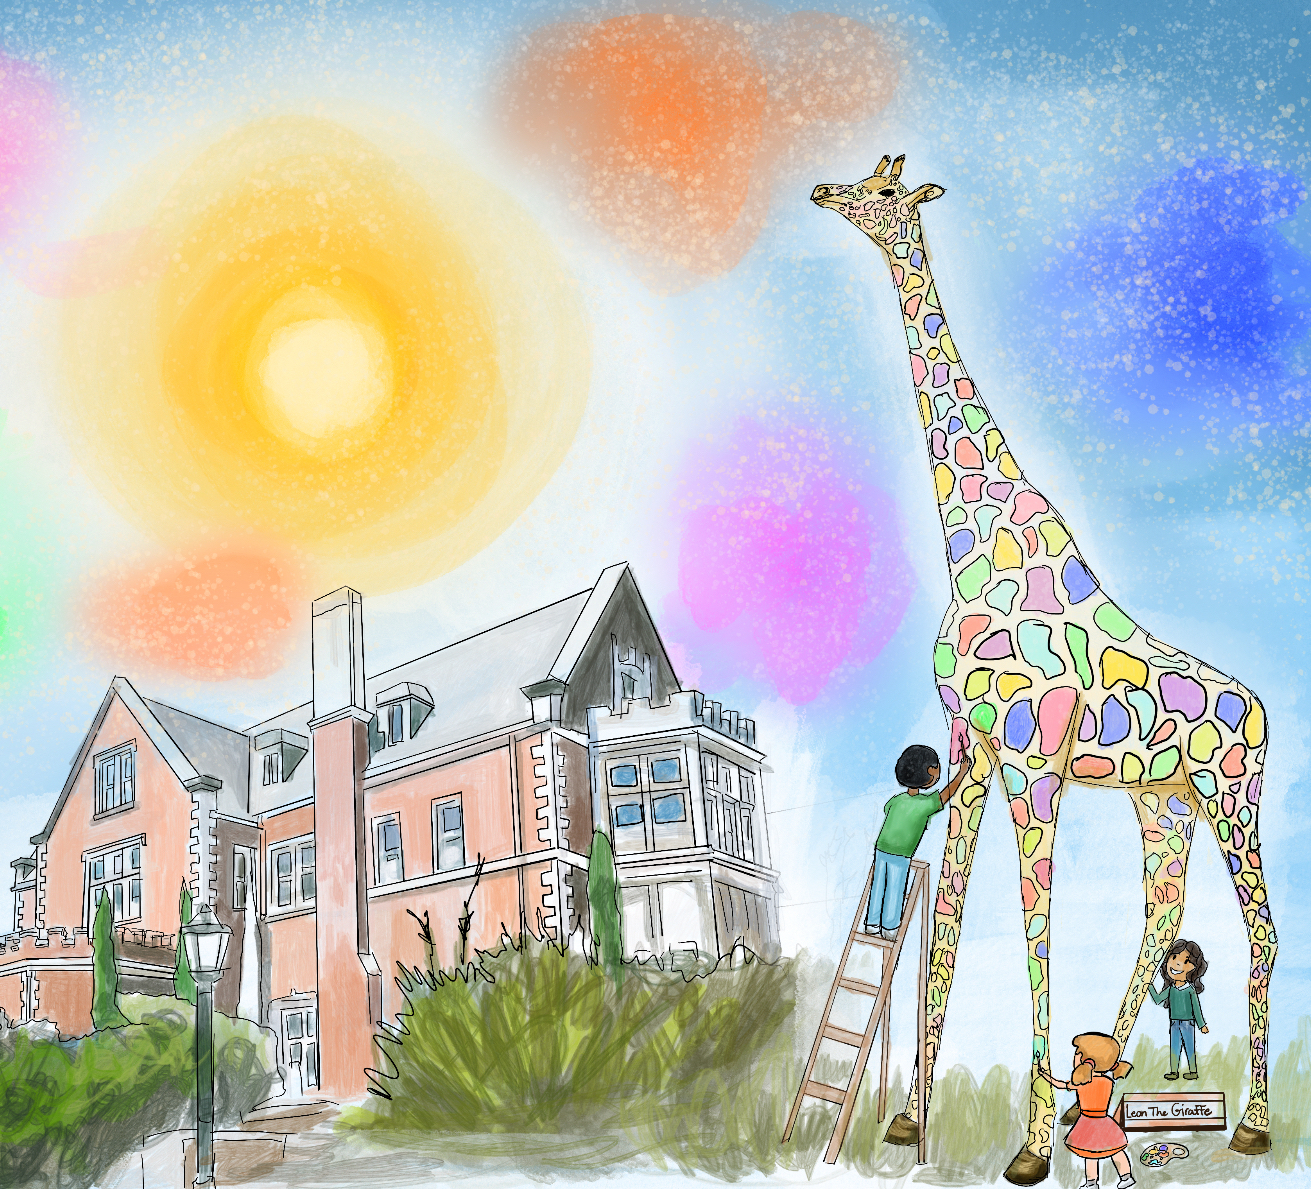 colorful drawing of a house surrounded by a sky with blotches of different colors, and next to it is a giant giraffe that kids are painting the spots in different colors